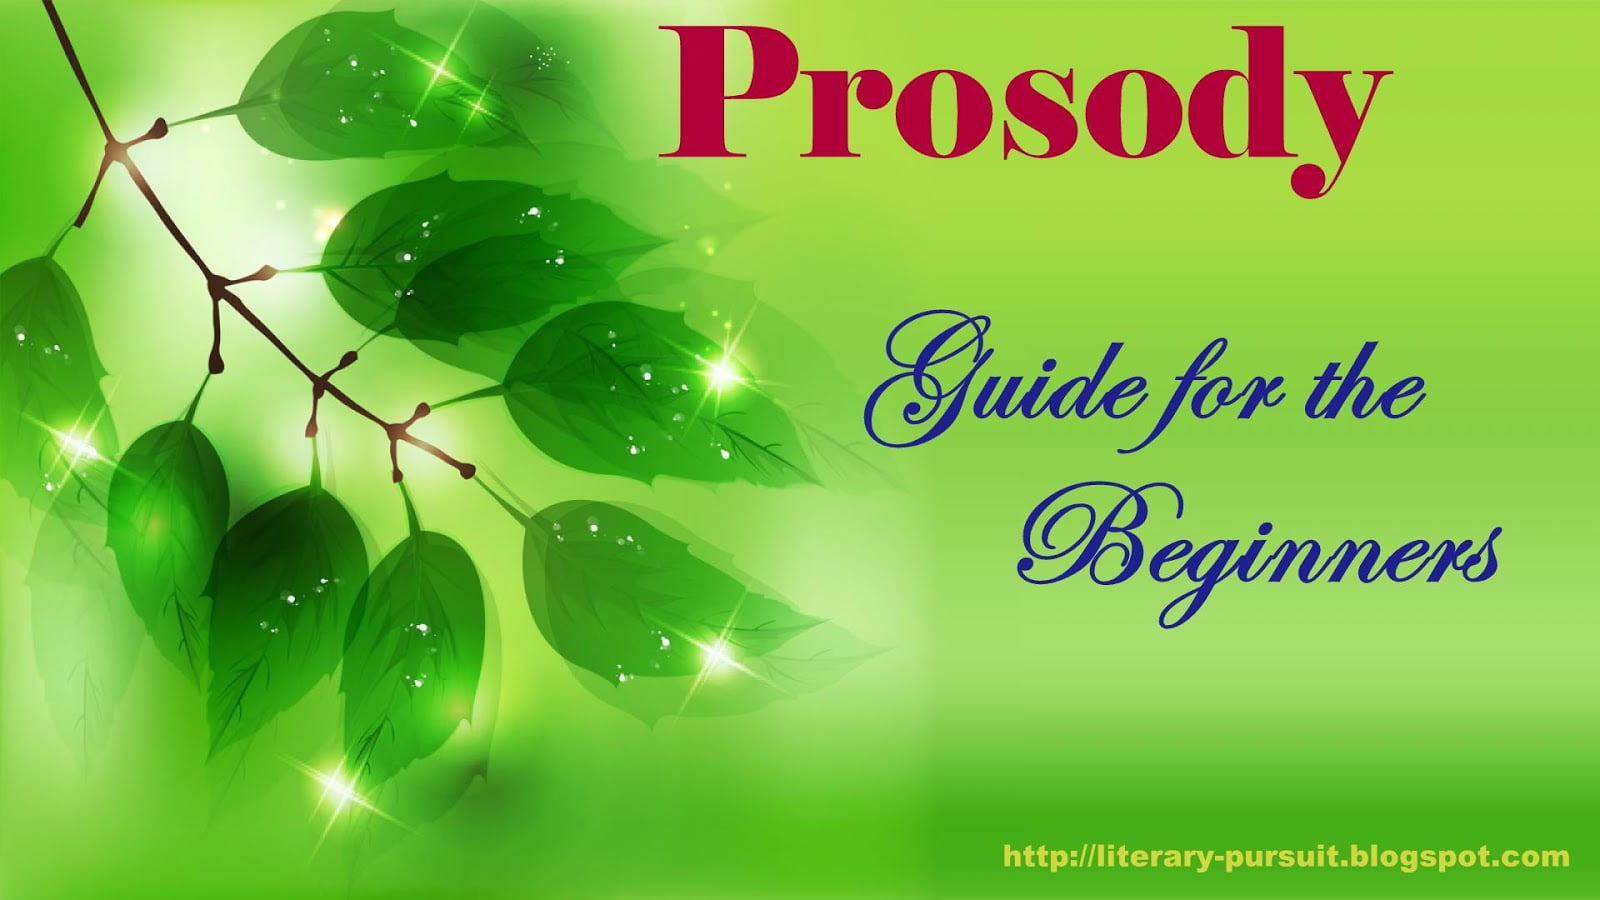 Prosody: Guide for the Beginners